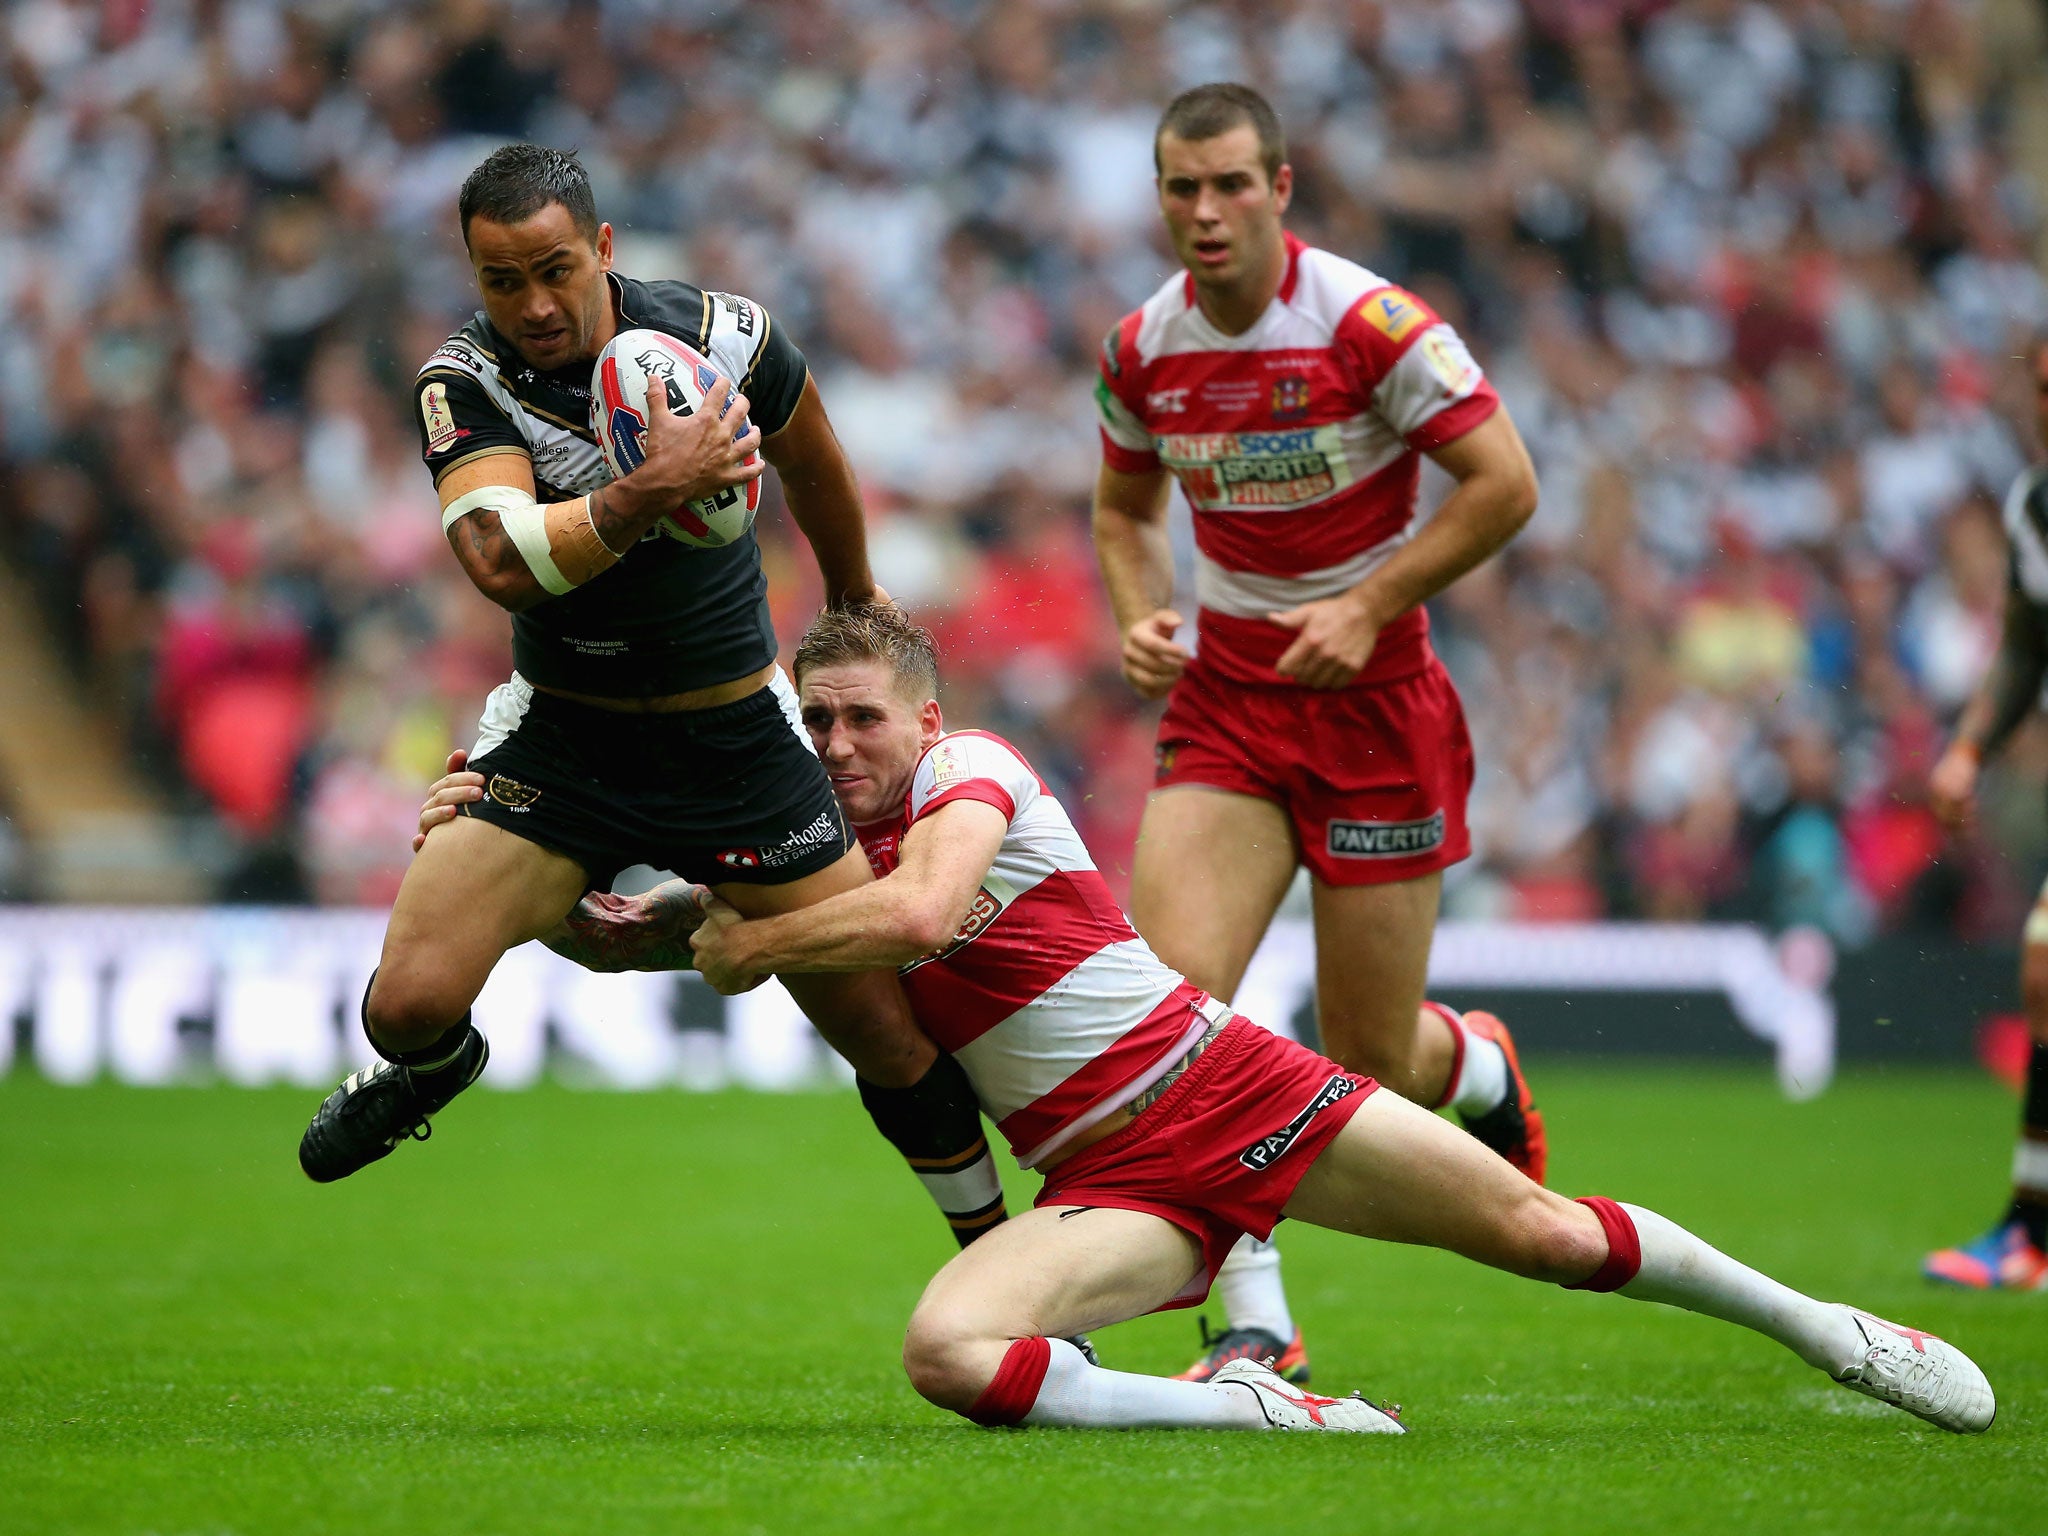 Challenge Cup Final Hulls Bid To Make History Comes Unstuck At Wembley Against Wigan The